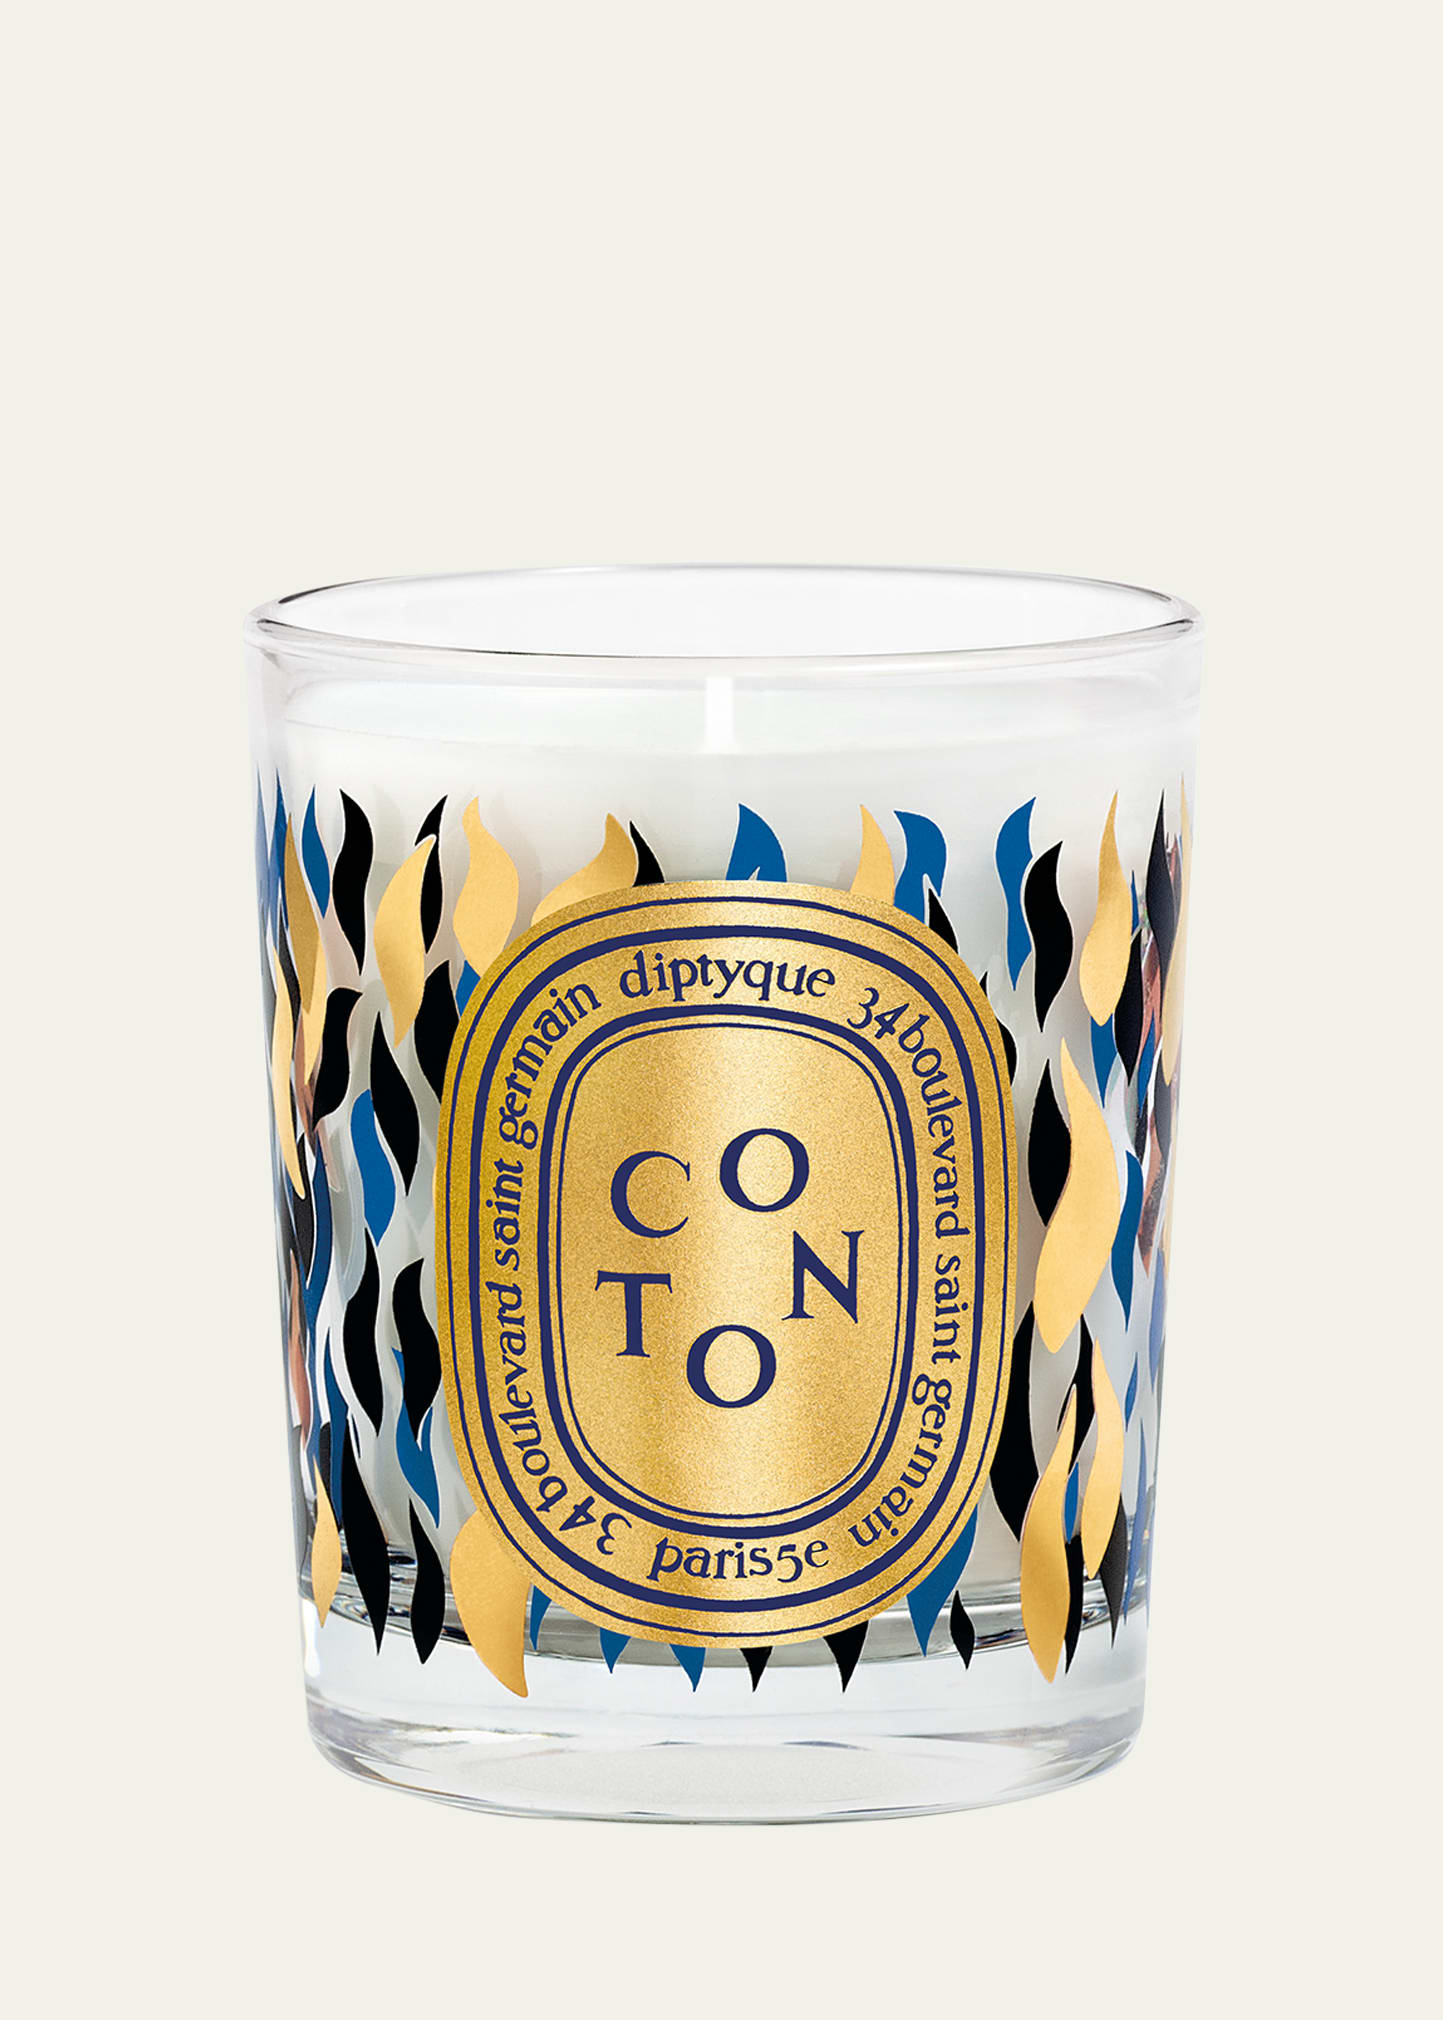 Coton (Cotton) Scented Candle - Limited Edition